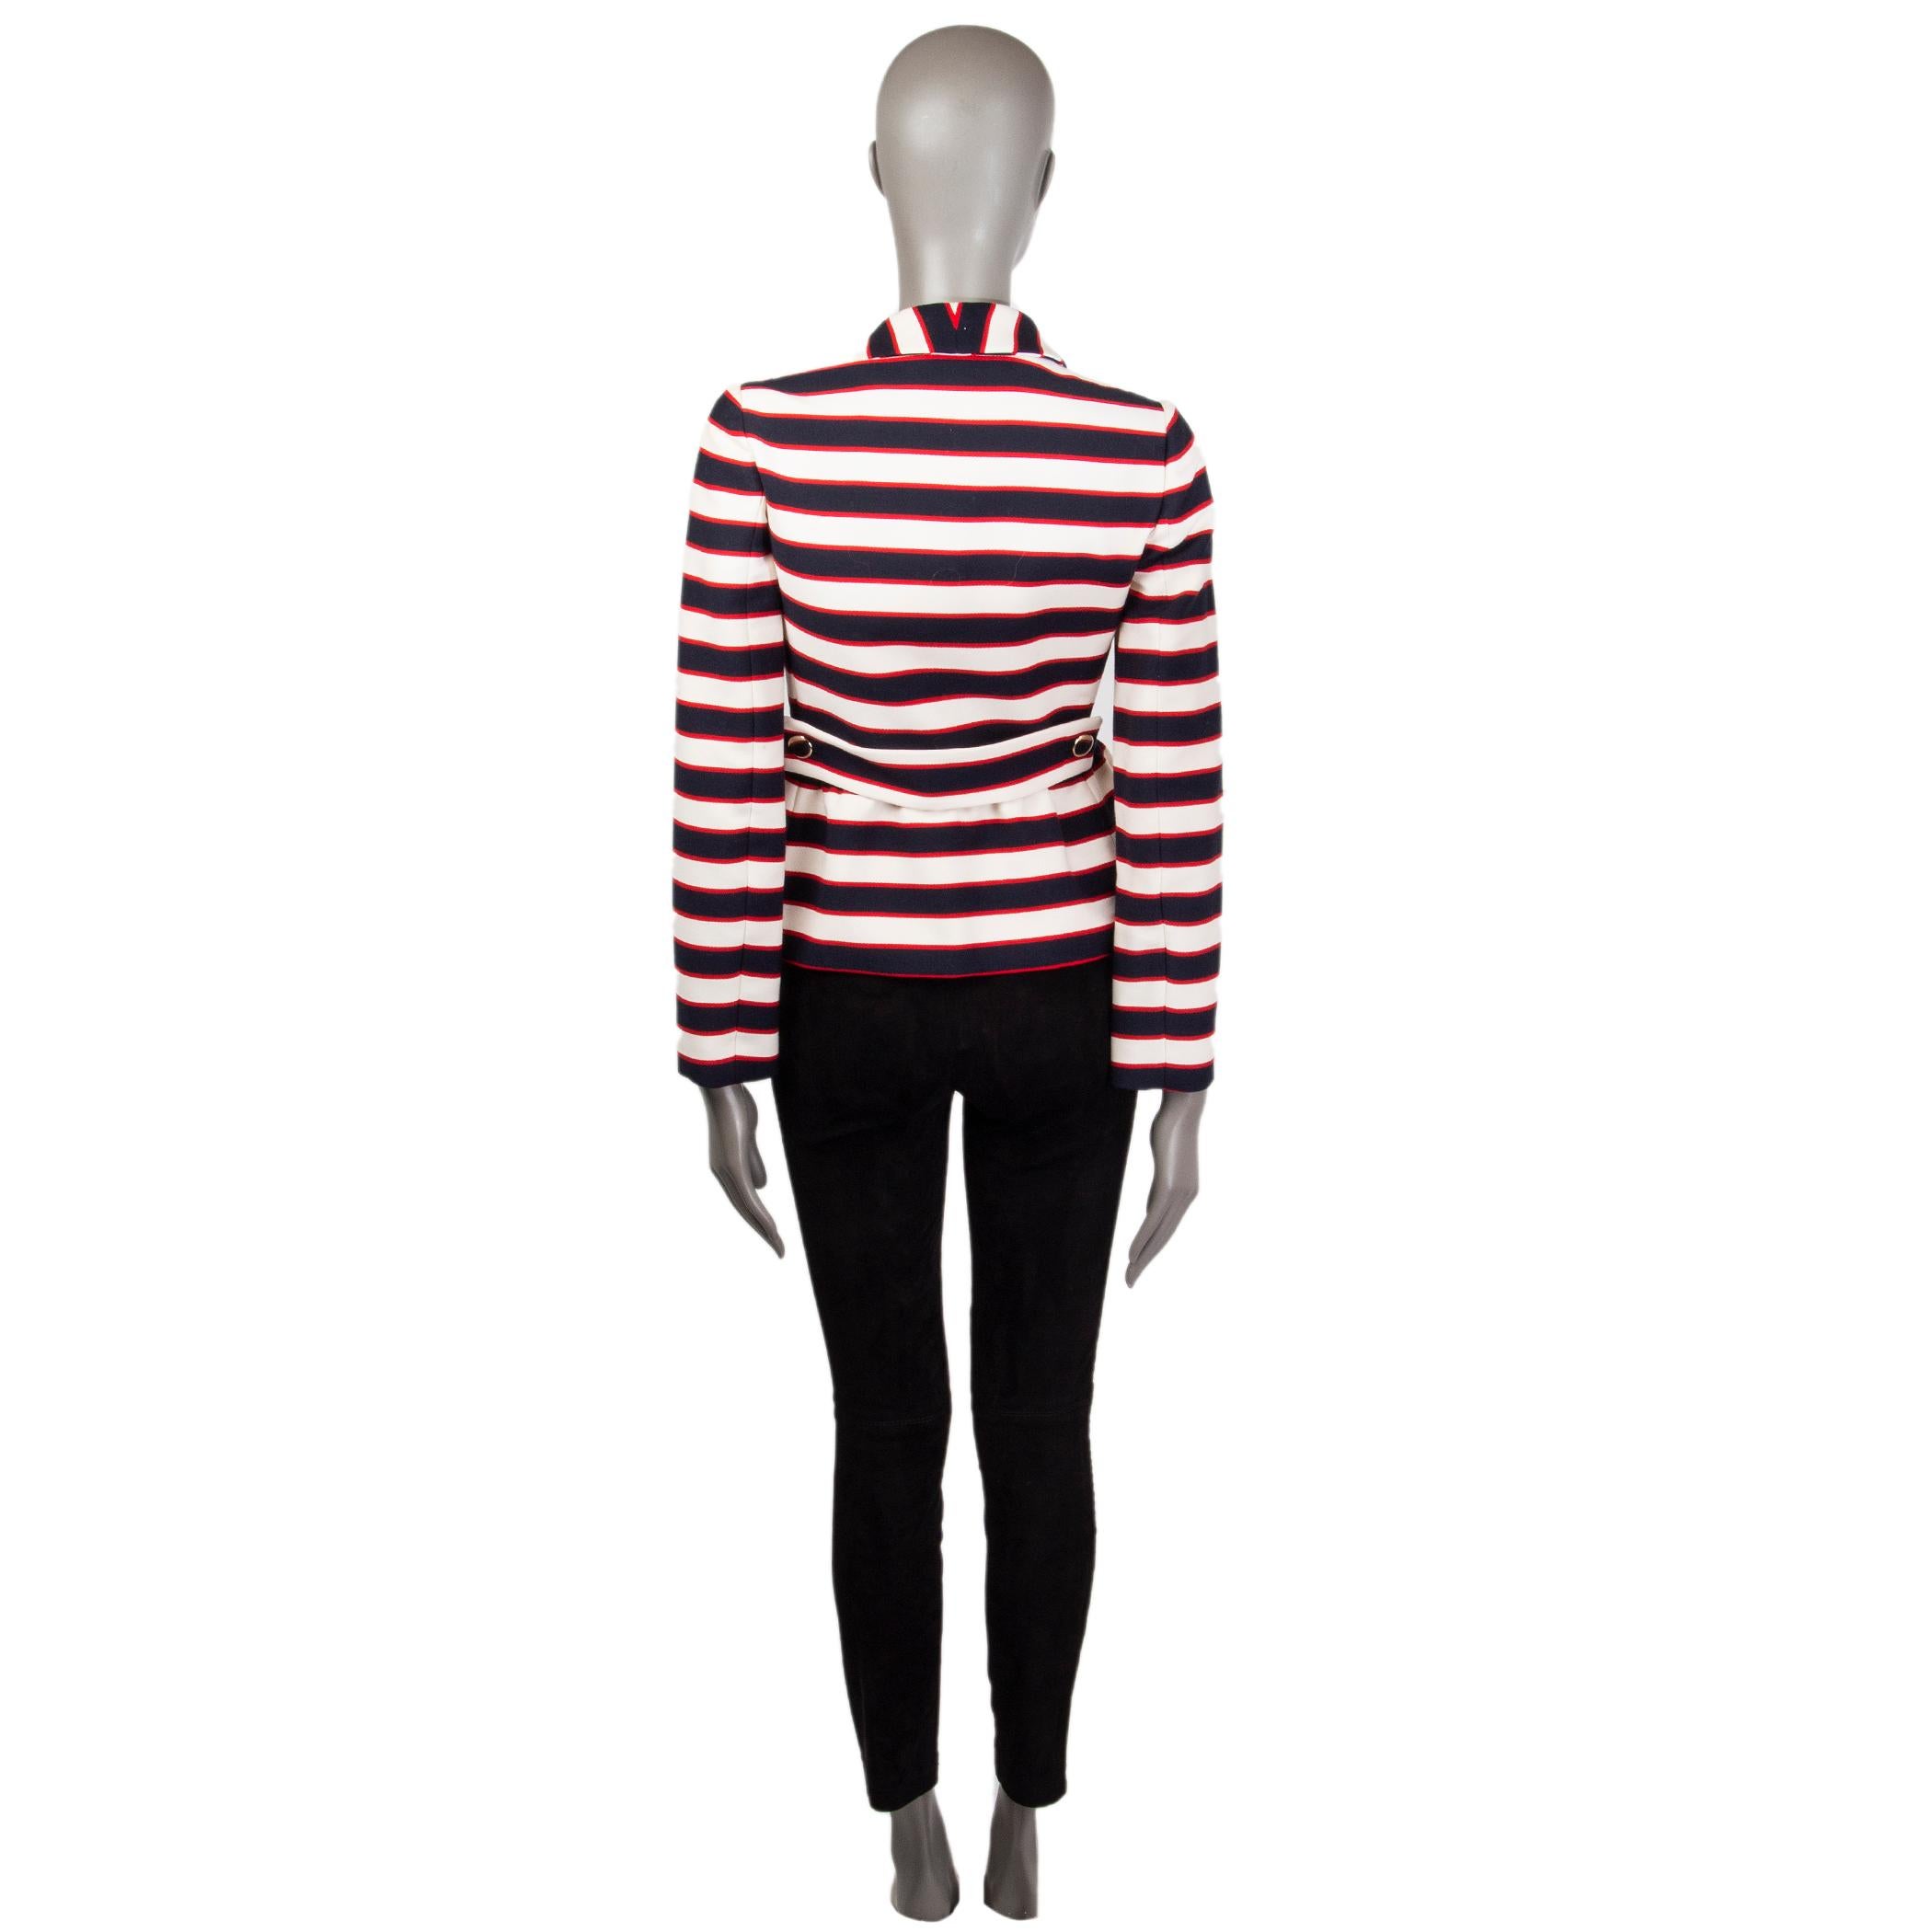 100% authentic Valentino nautical striped blazer in navy, red, and off-white virgin wool (85%) and silk (15%). With flat collar, three button-decorated folded patch pockets onthe front, gathered waist, and two-button waistband on the back. Closes